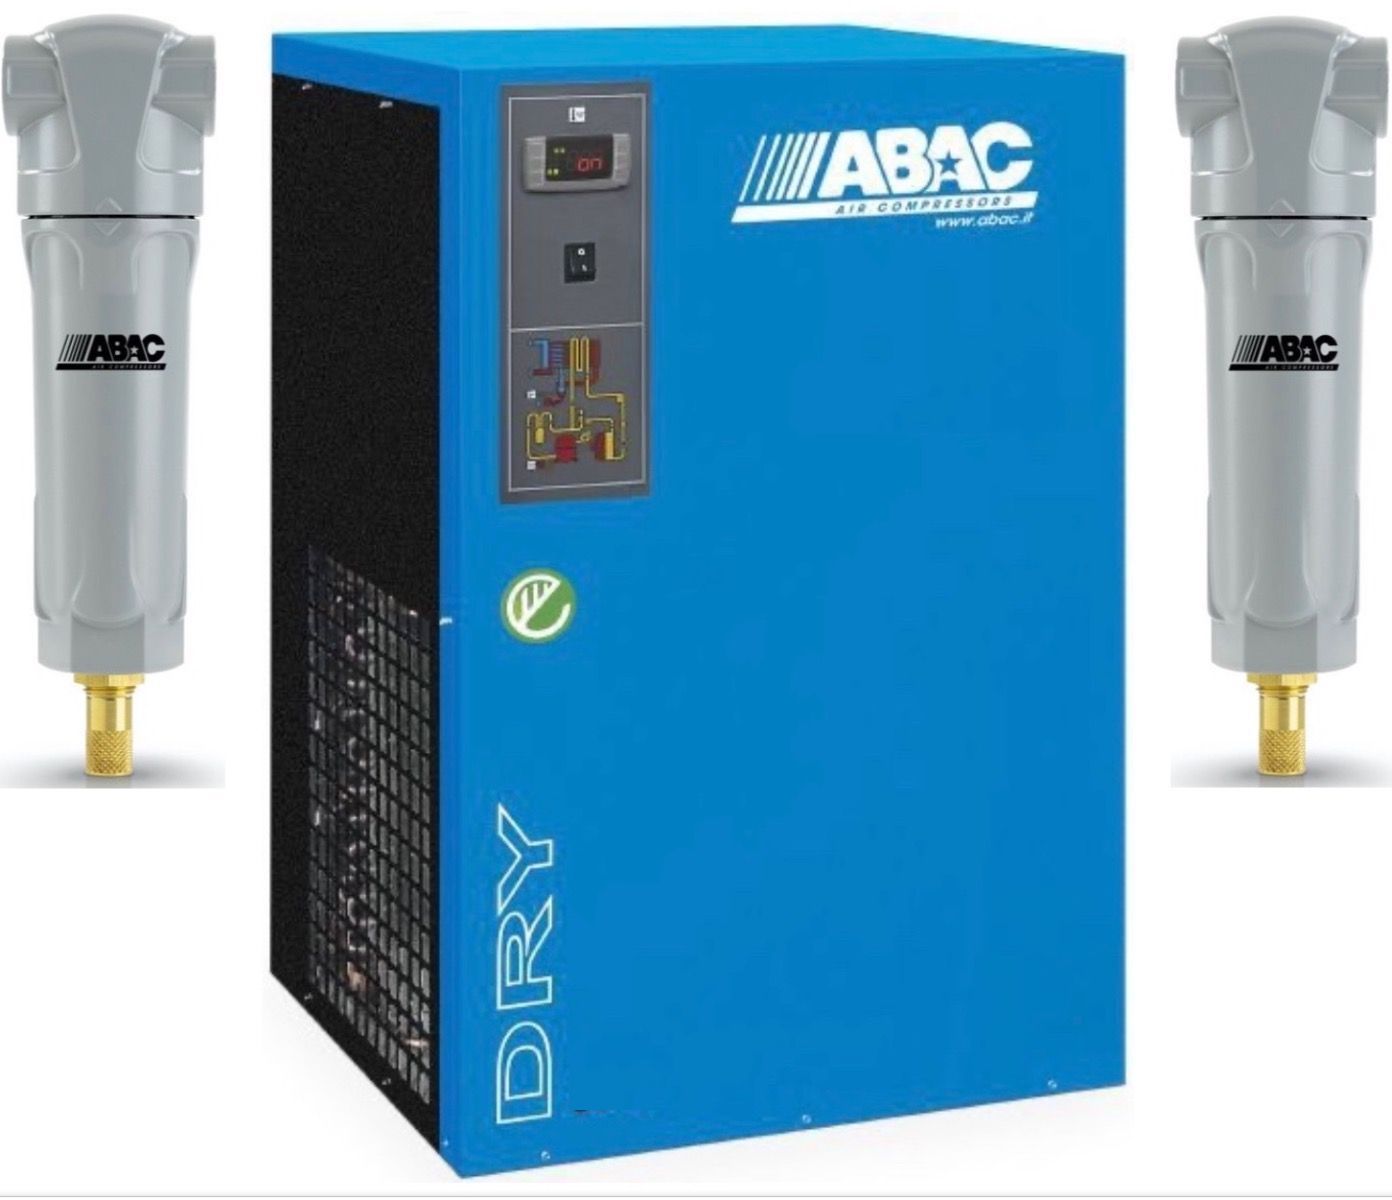 Abac DRY 250 159 cfm Compressed Air Dryer & Filters